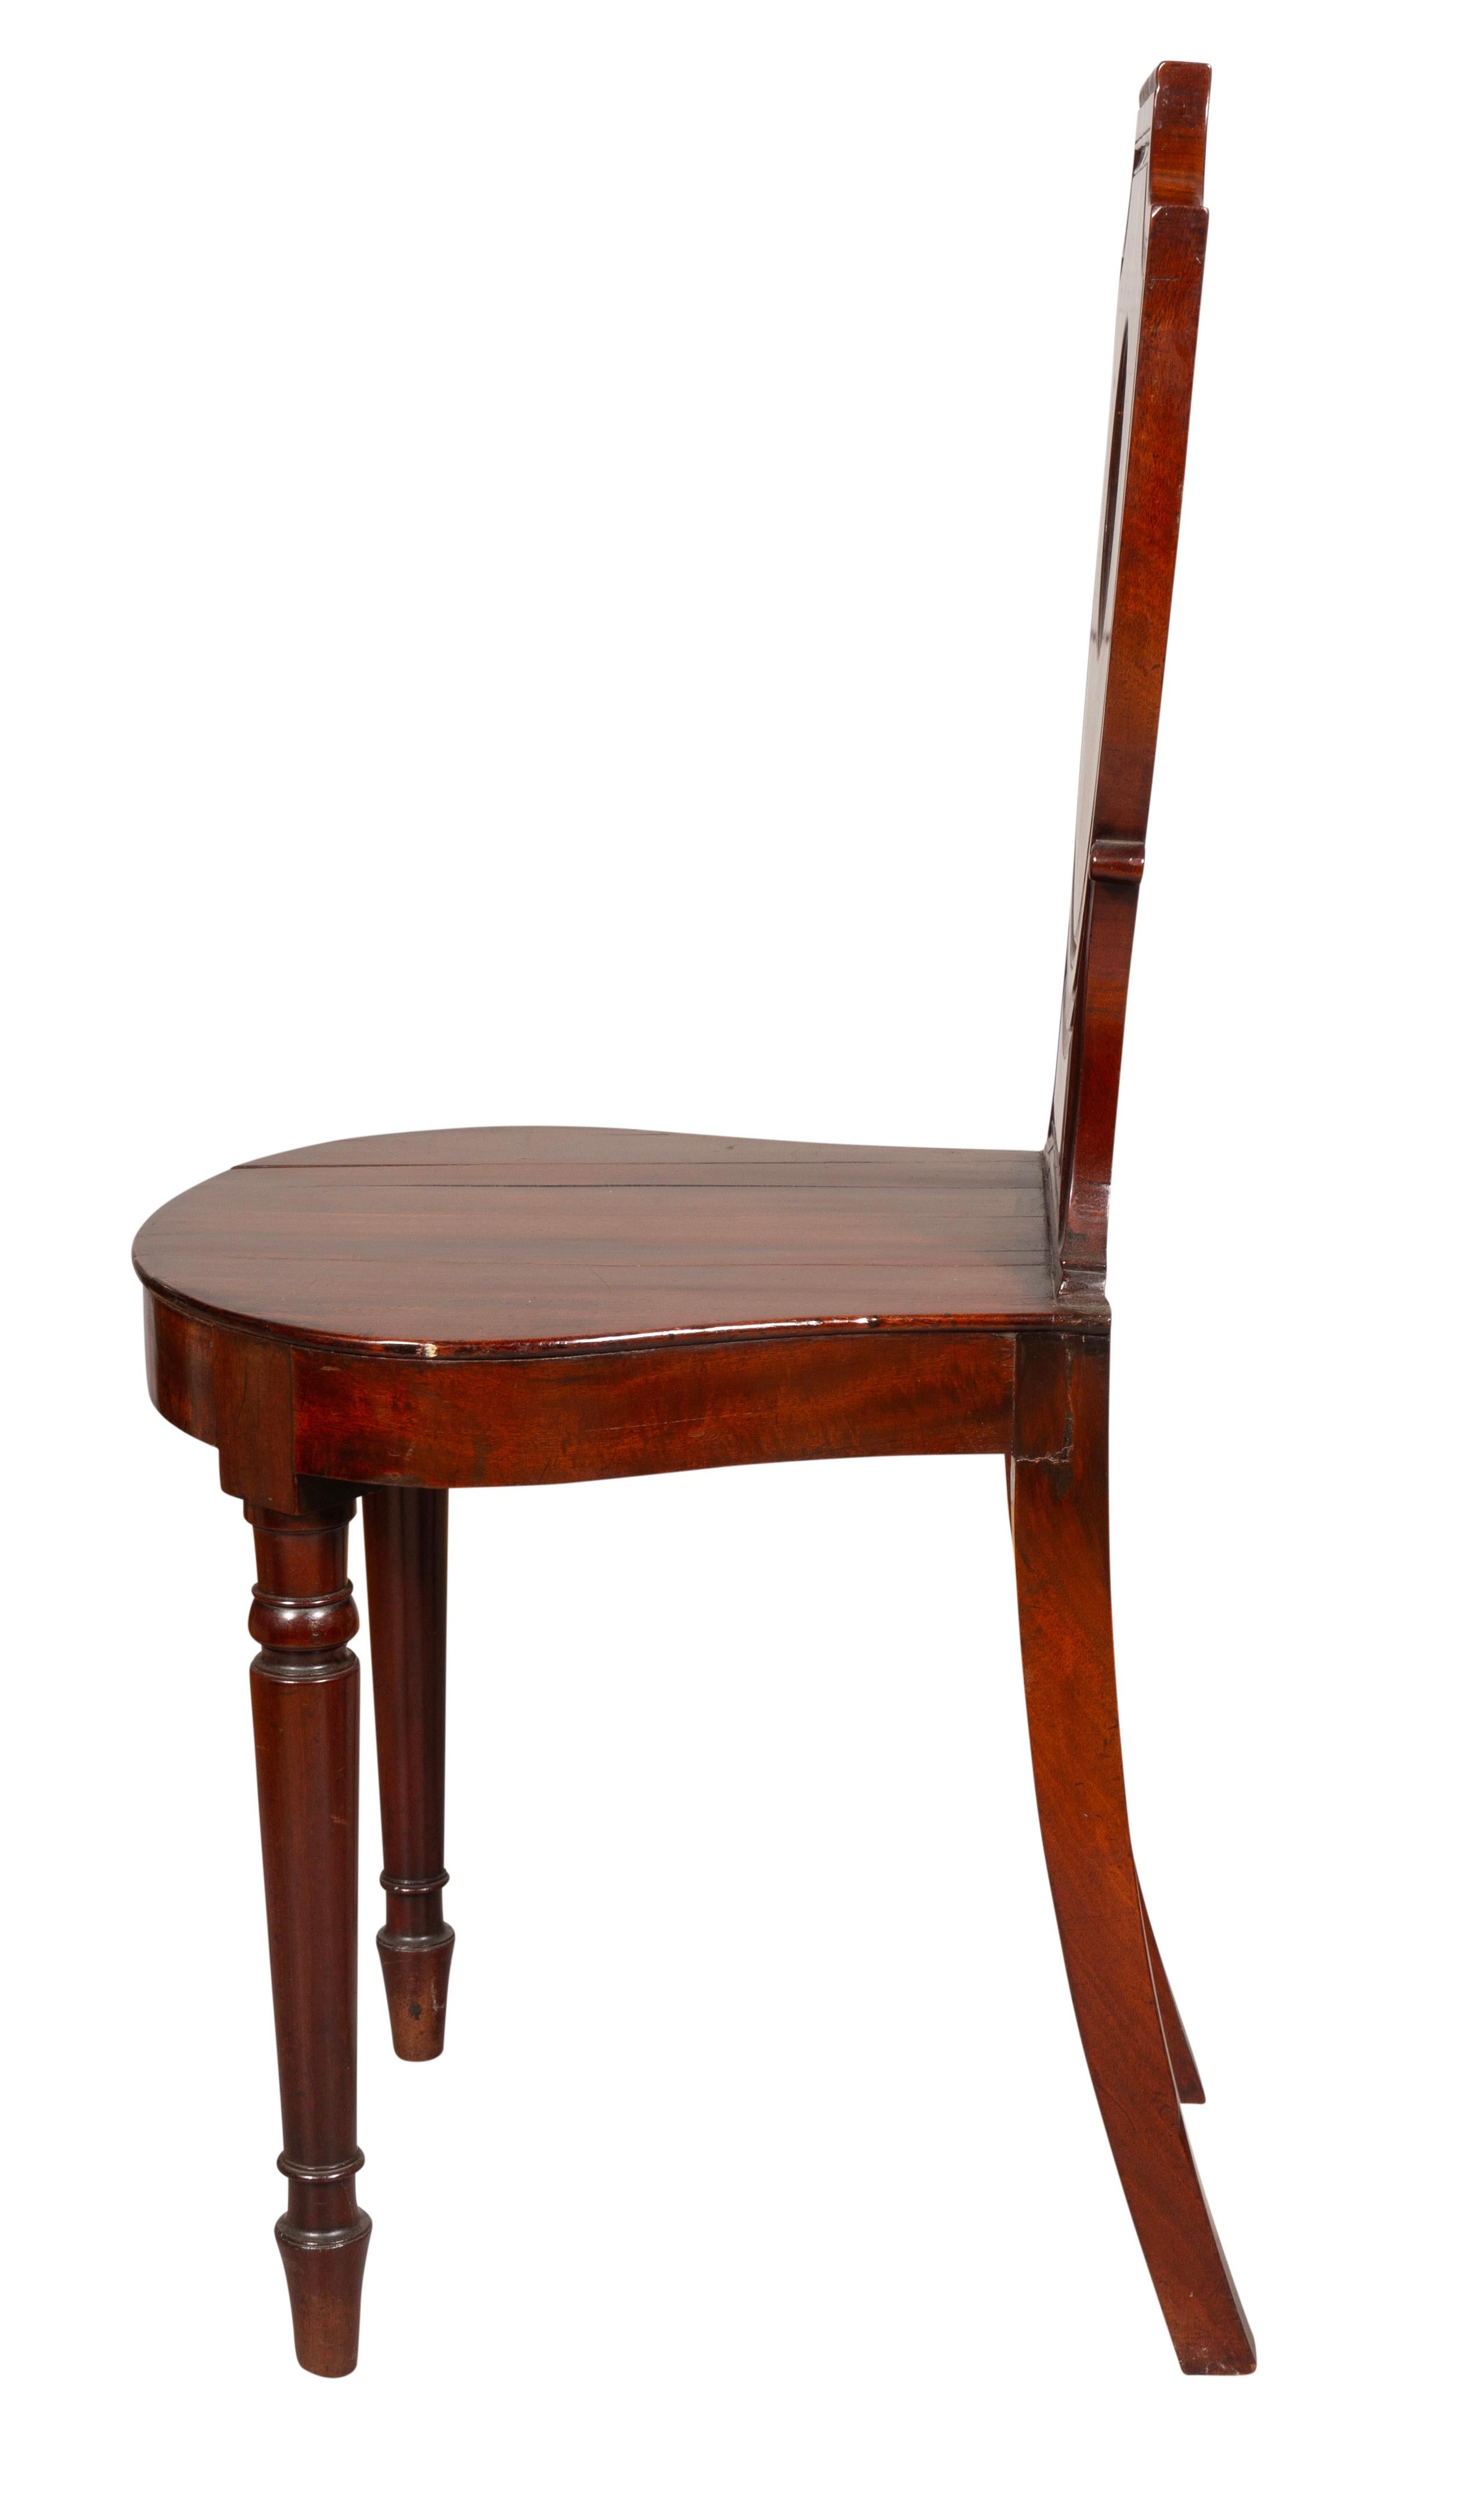 Early 19th Century Pair Of Regency Mahogany Hall Chairs For Sale